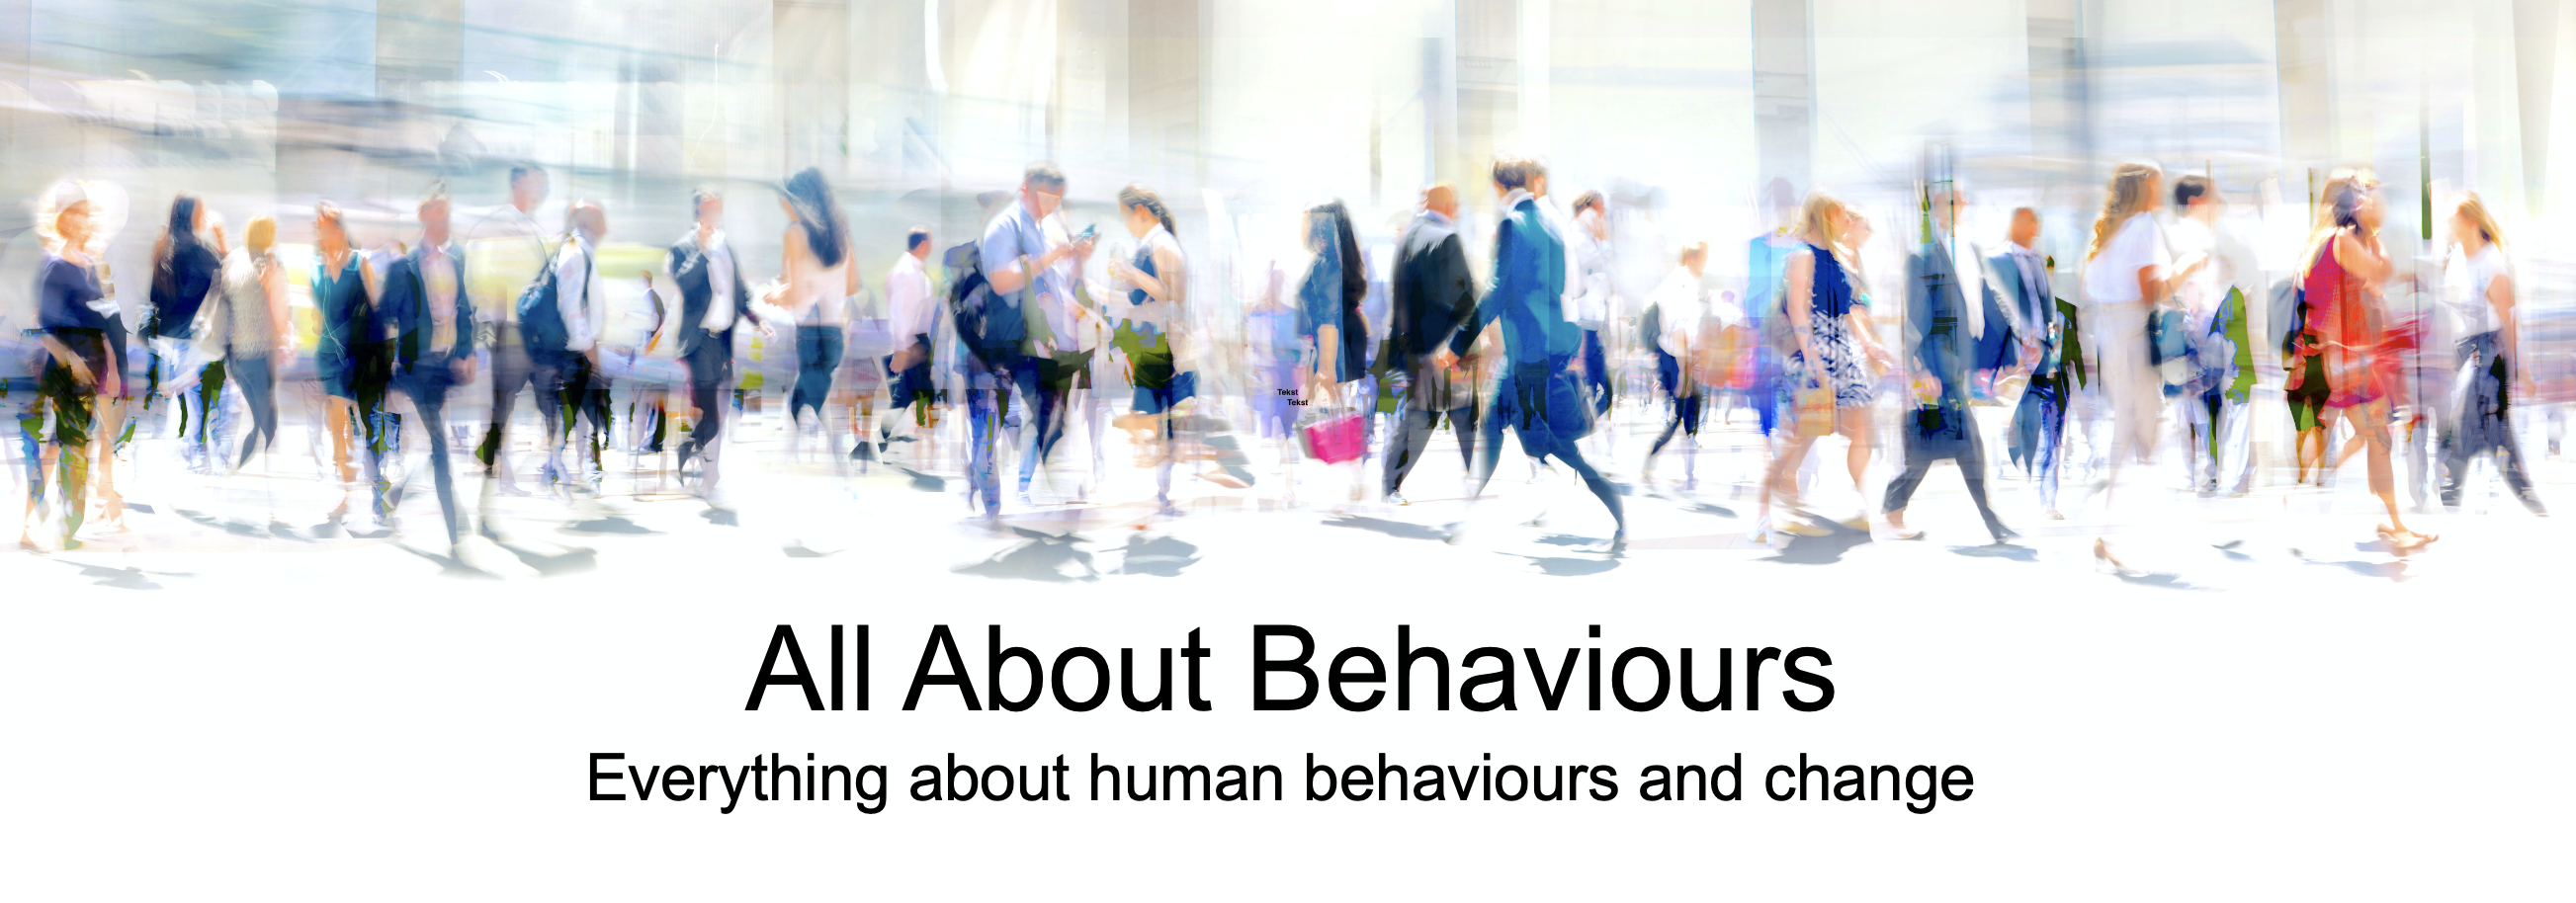 All About Behaviours